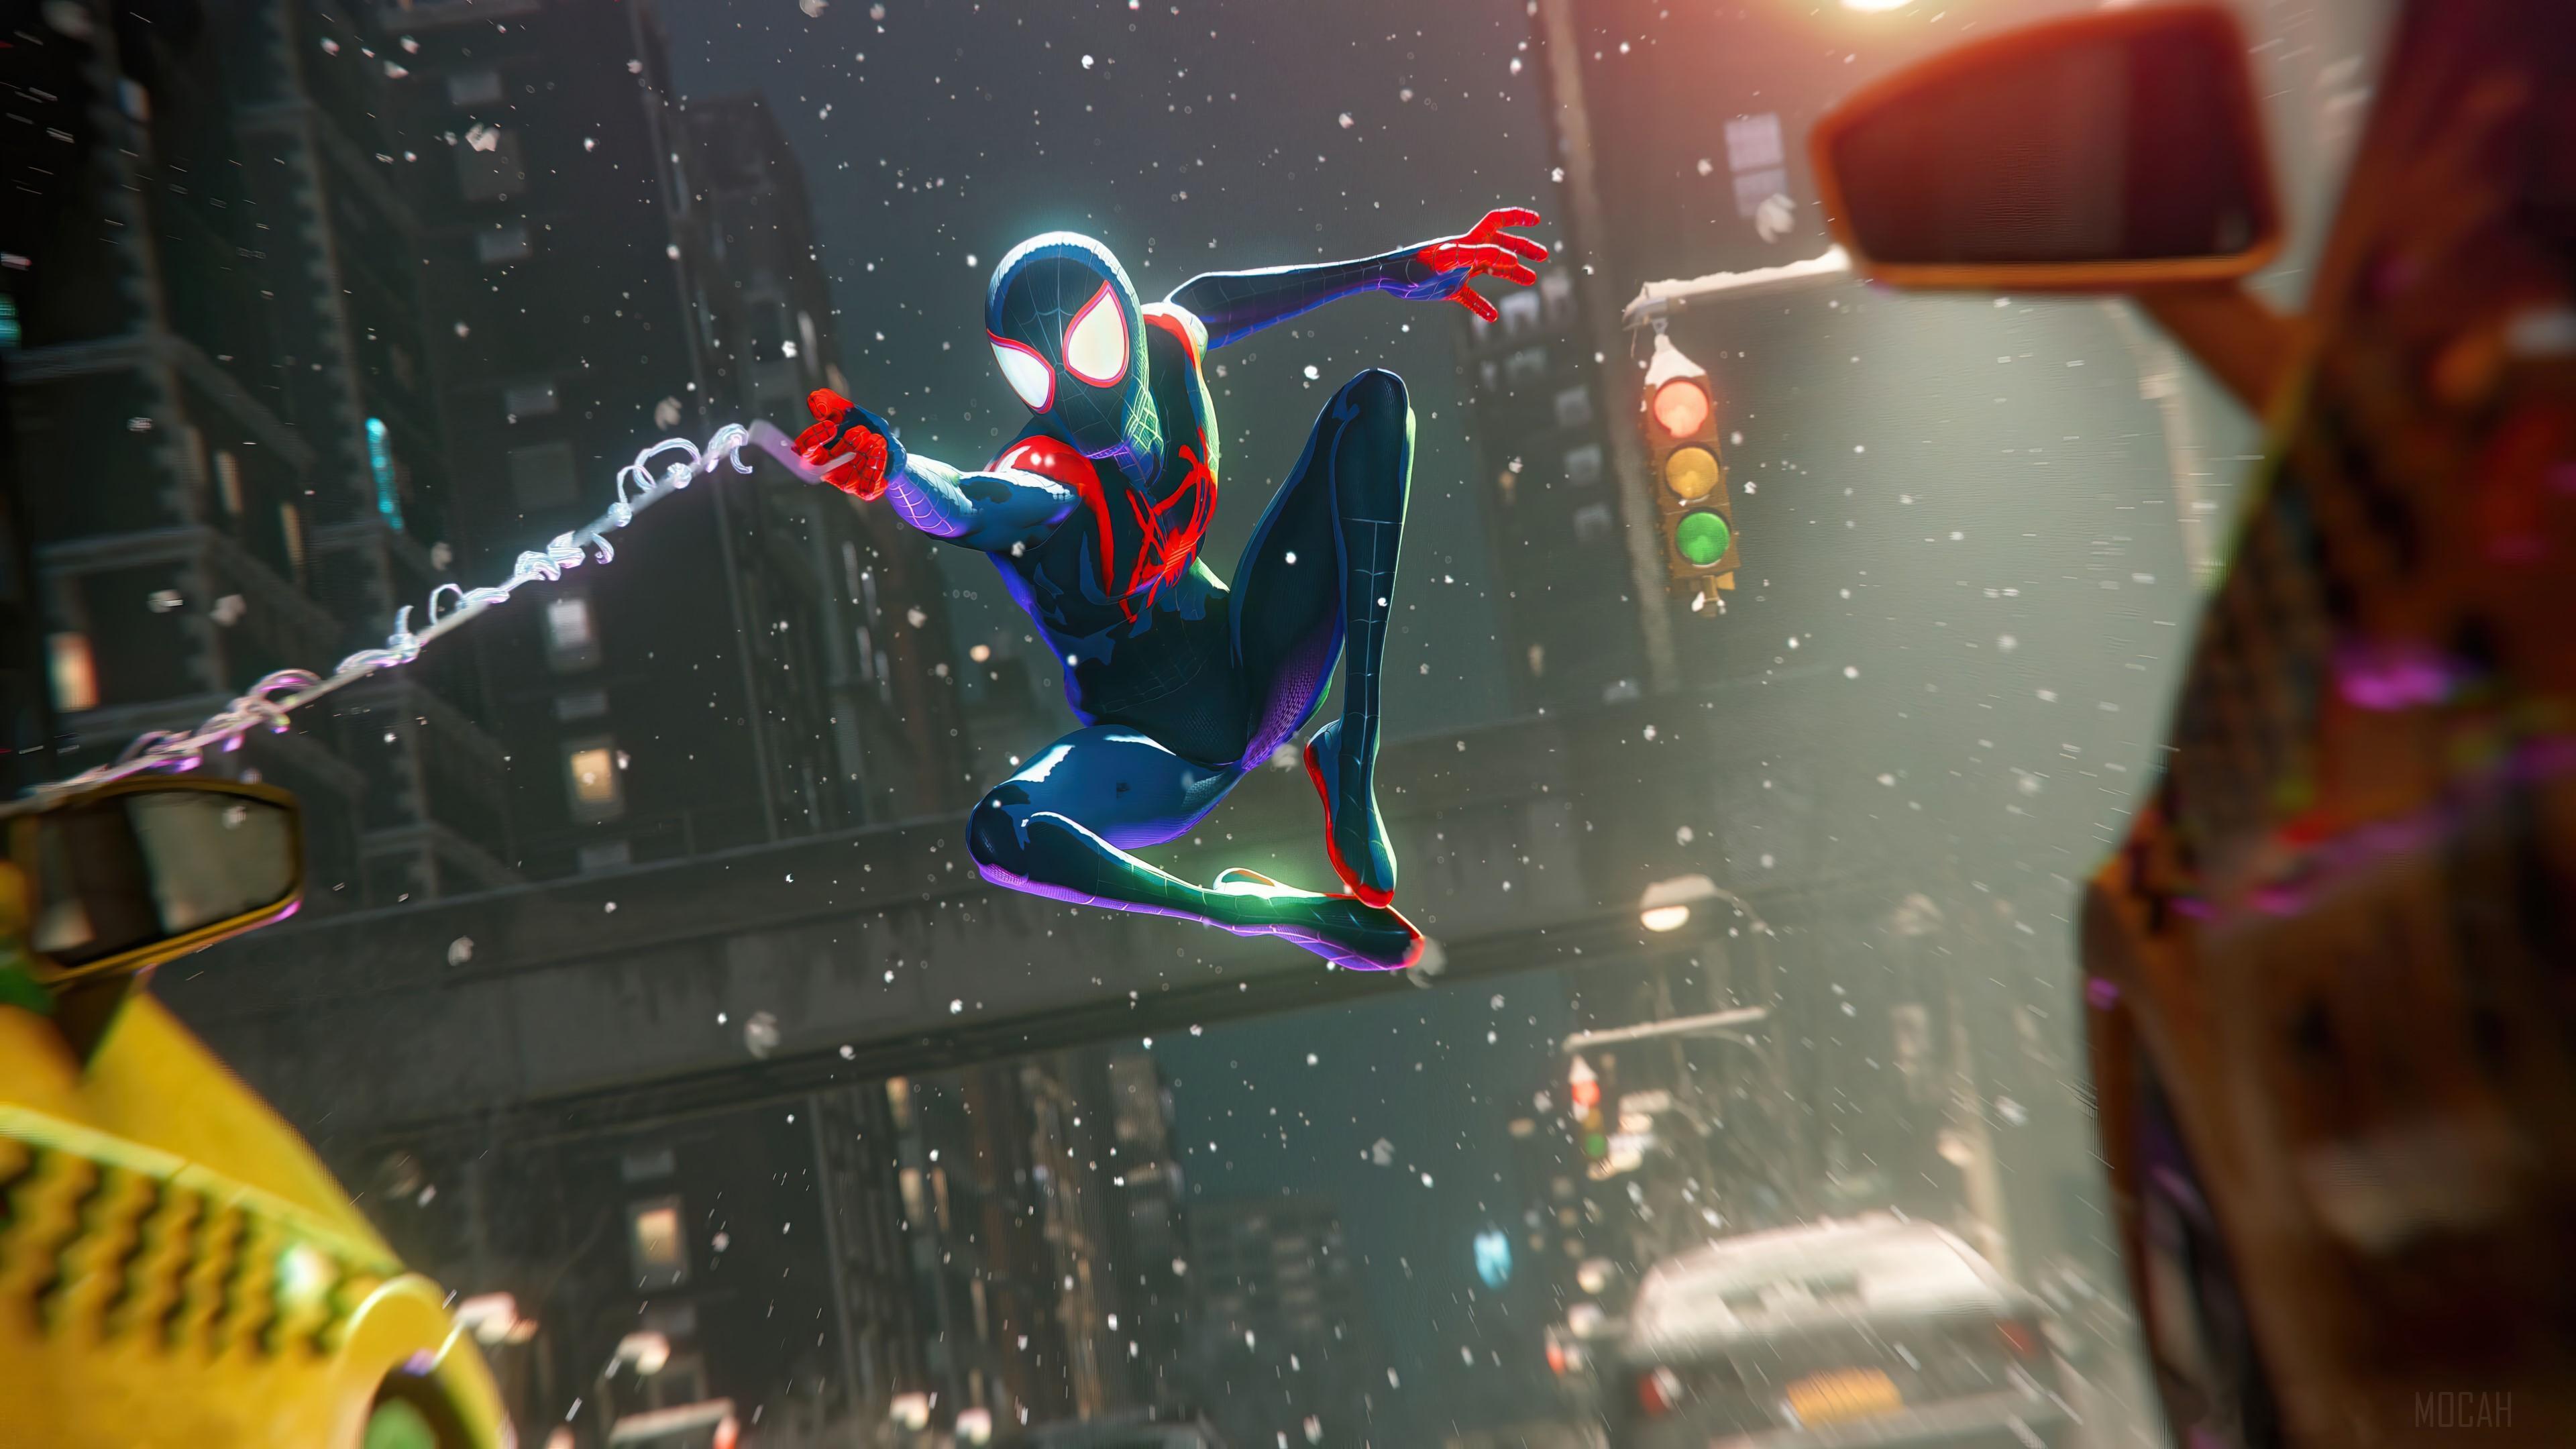 HD wallpaper, Into The Spider Verse Suit 4K, Playstation 5, Insomniac, Marvels Spider Man Miles Morales, Video Game